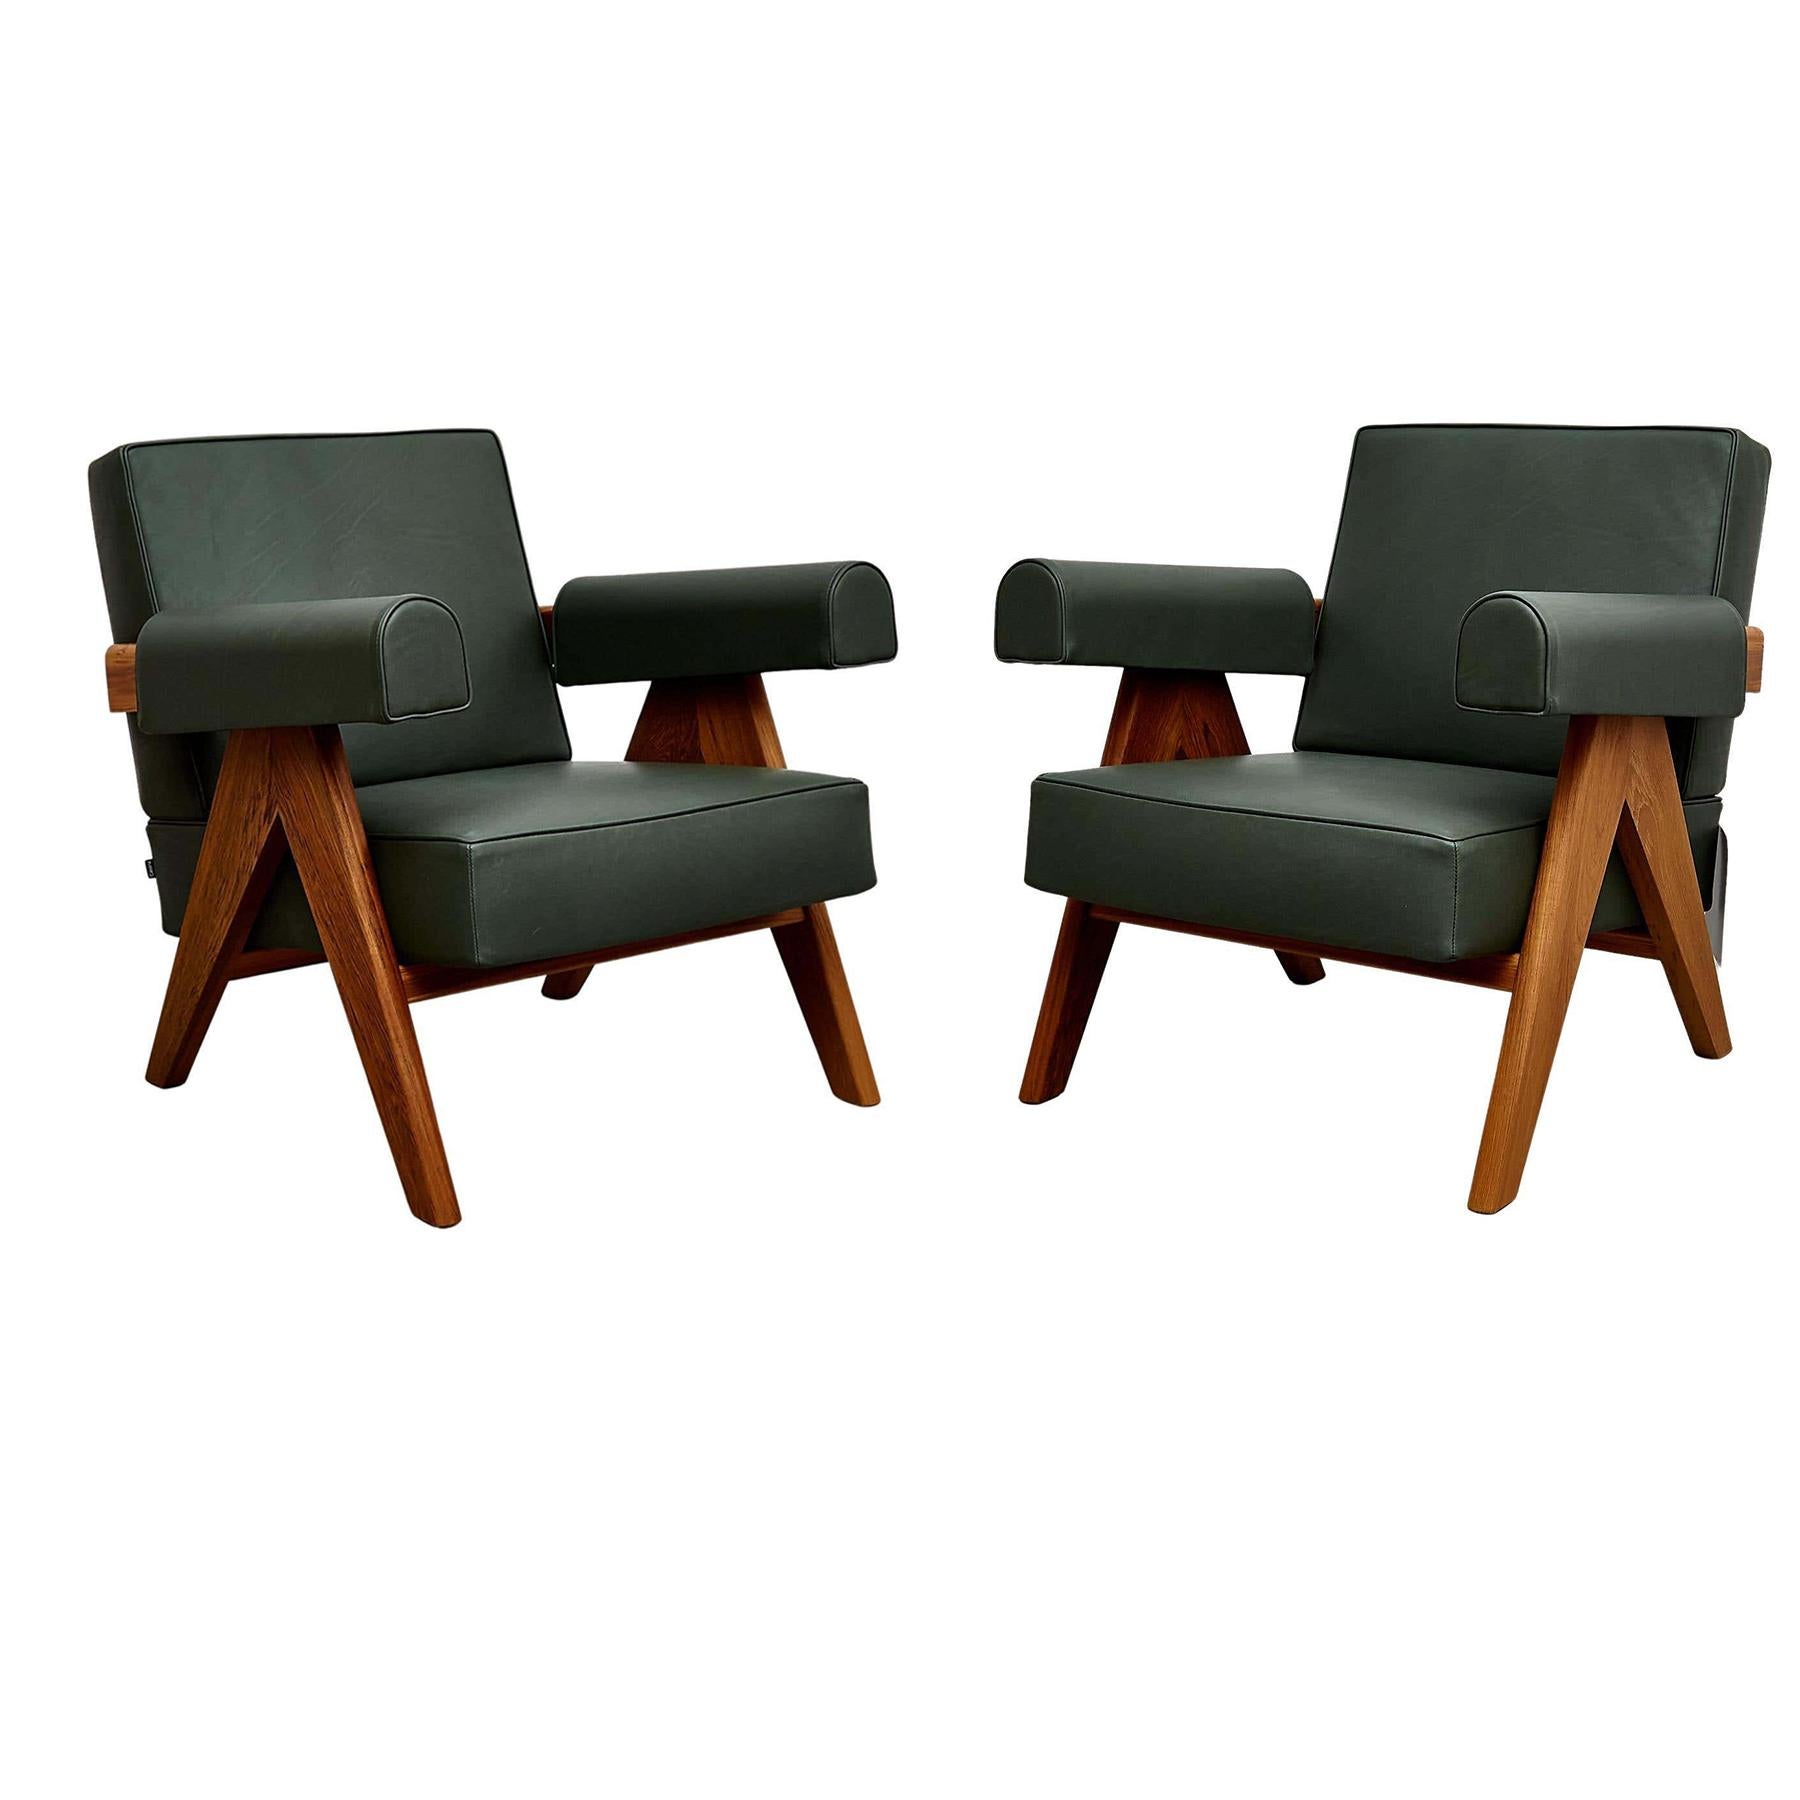 Set of Two Pierre Jeanneret Teak Wood Green Leather Armchair by Cassina For Sale